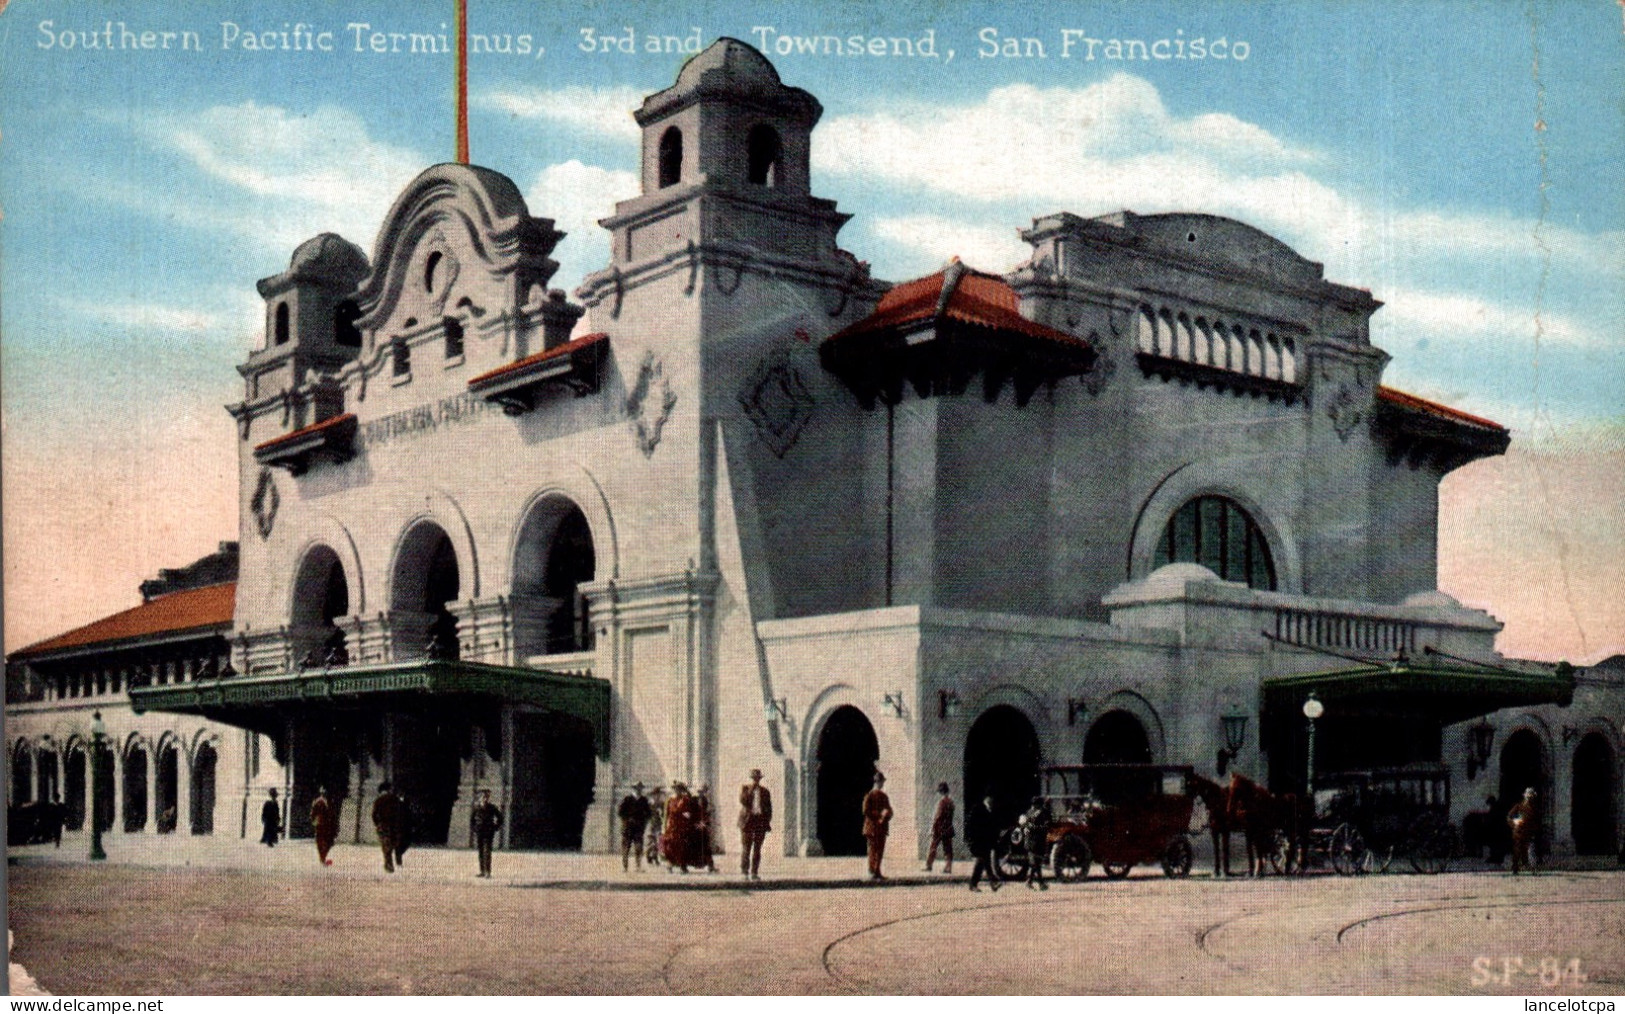 SOUTHERN PACIFIC TERMINUS - 3rd AND TOWNSEND - SAN FRANCISCO - San Francisco